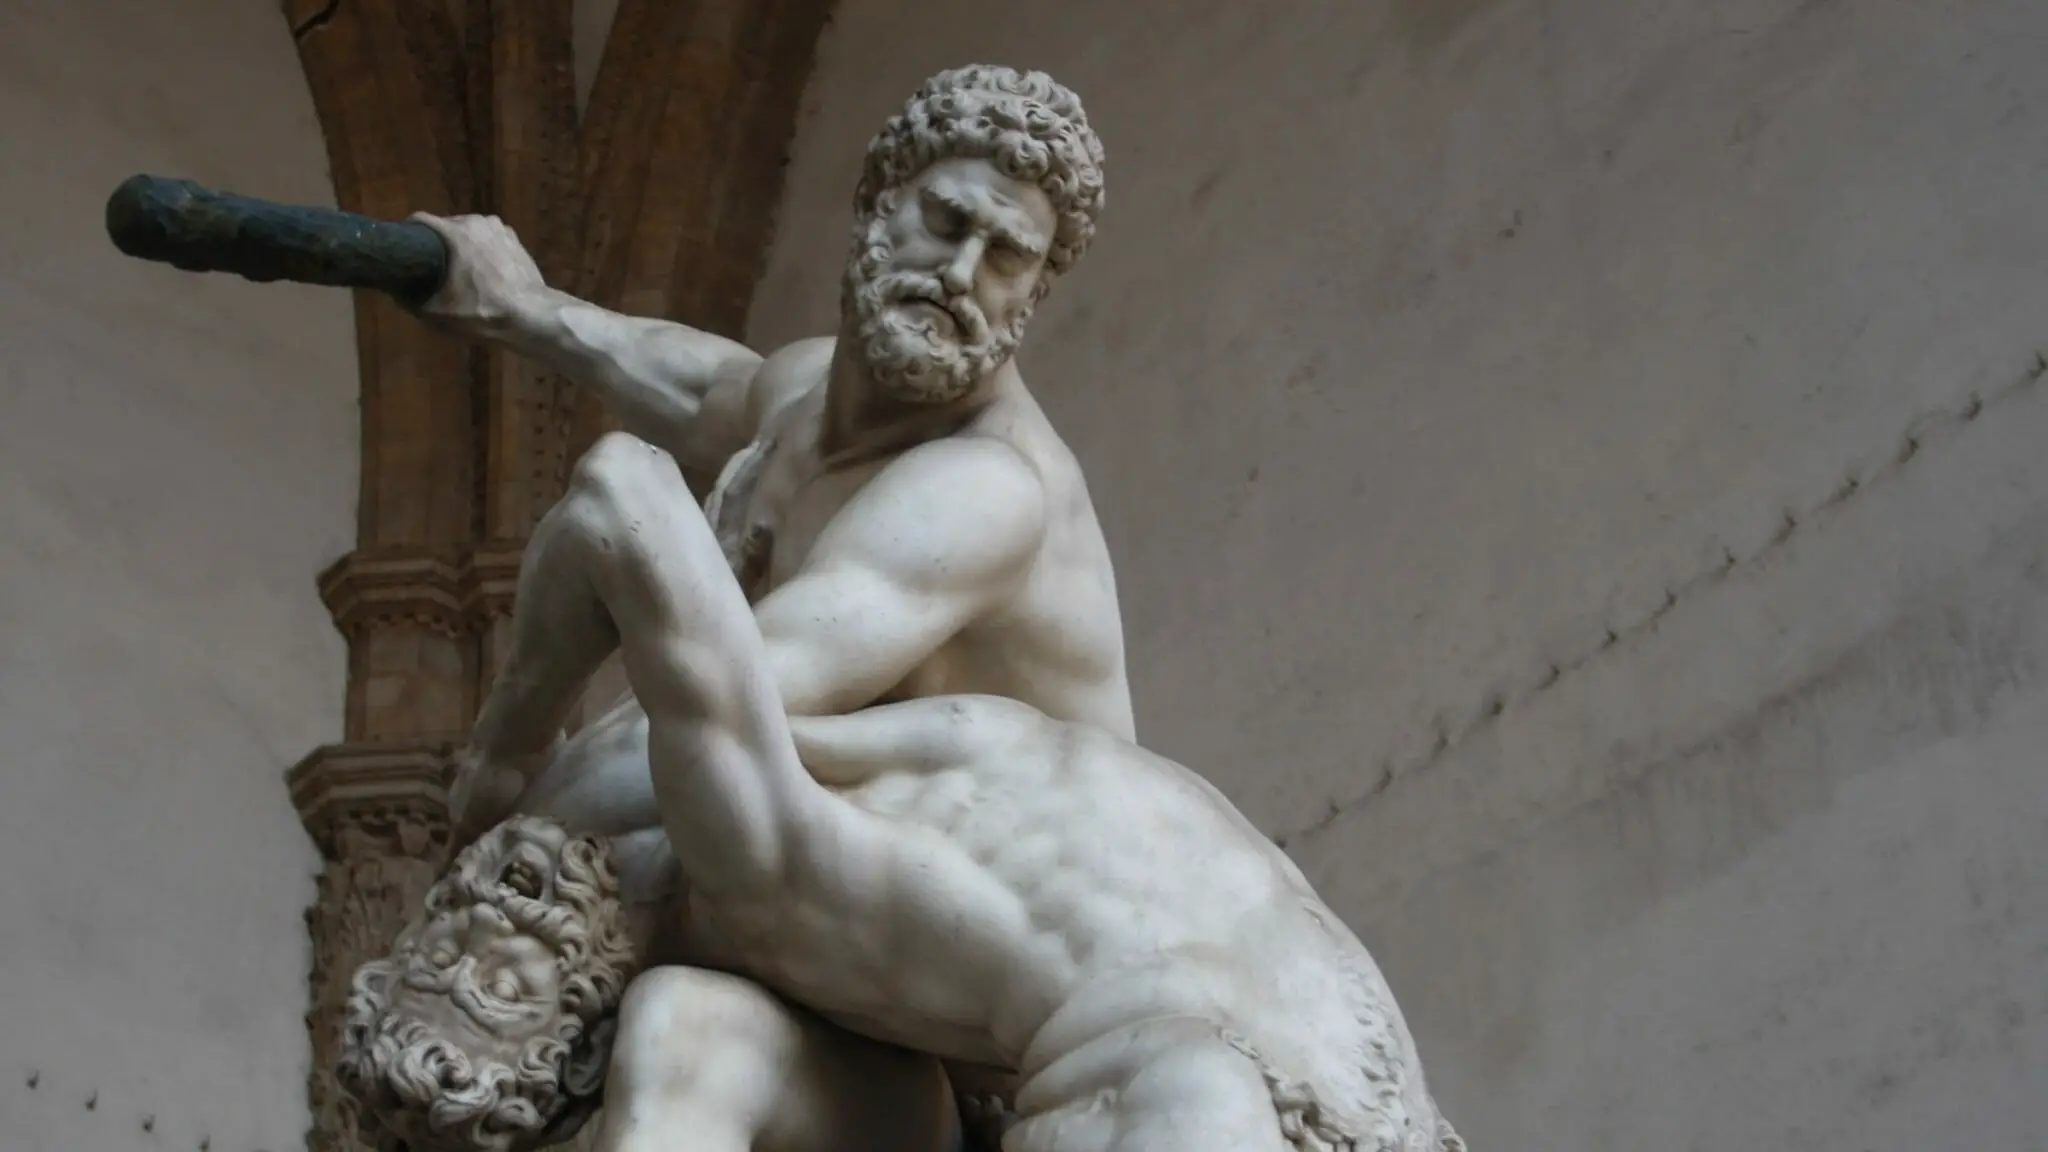 Wrestling history in ancient Greece seen in statue of a man wrestling with a centaur.